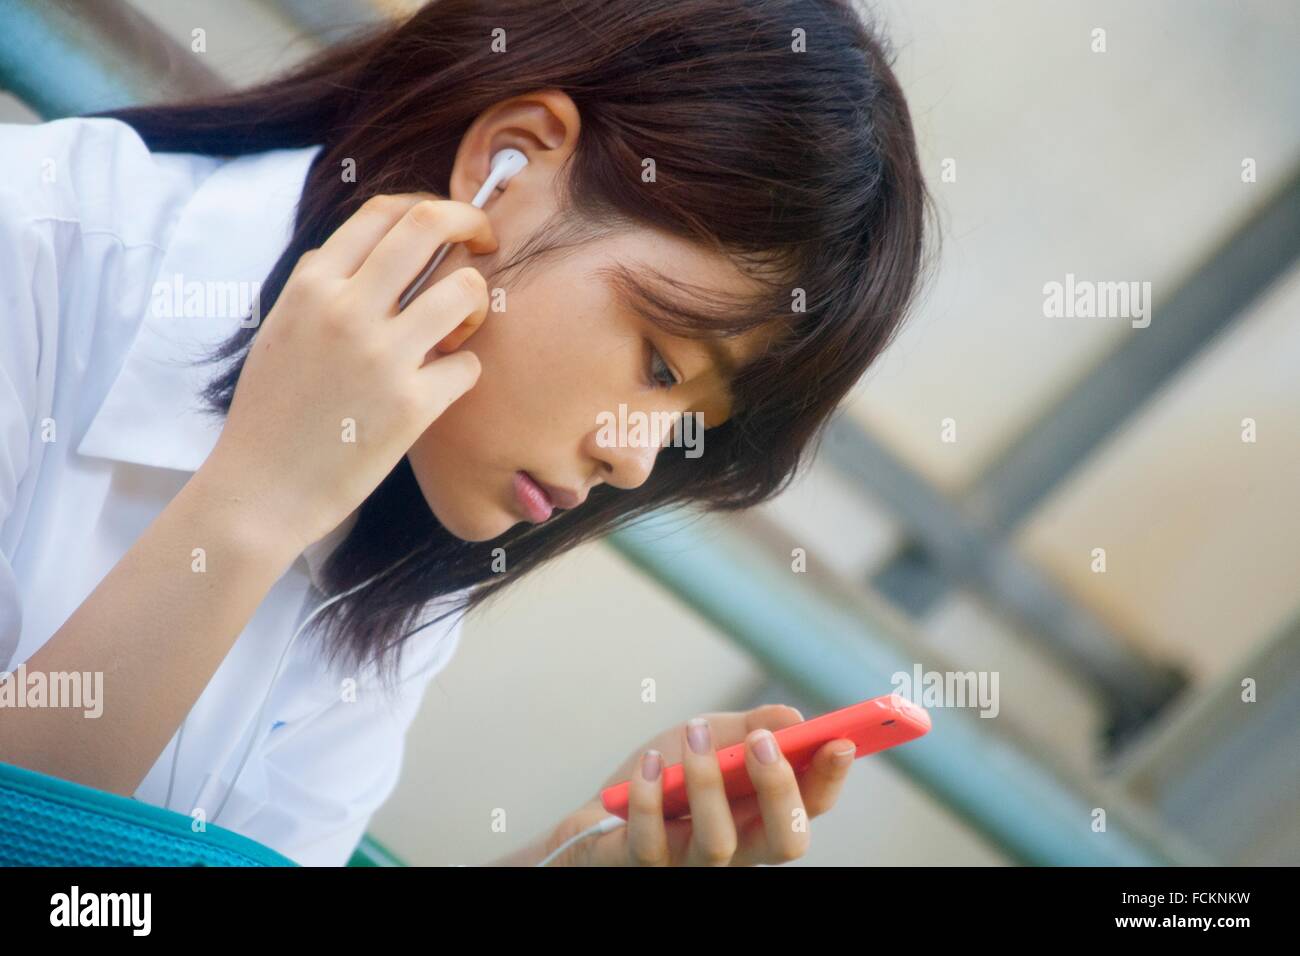 Japanese girl with smartphone Stock Photo